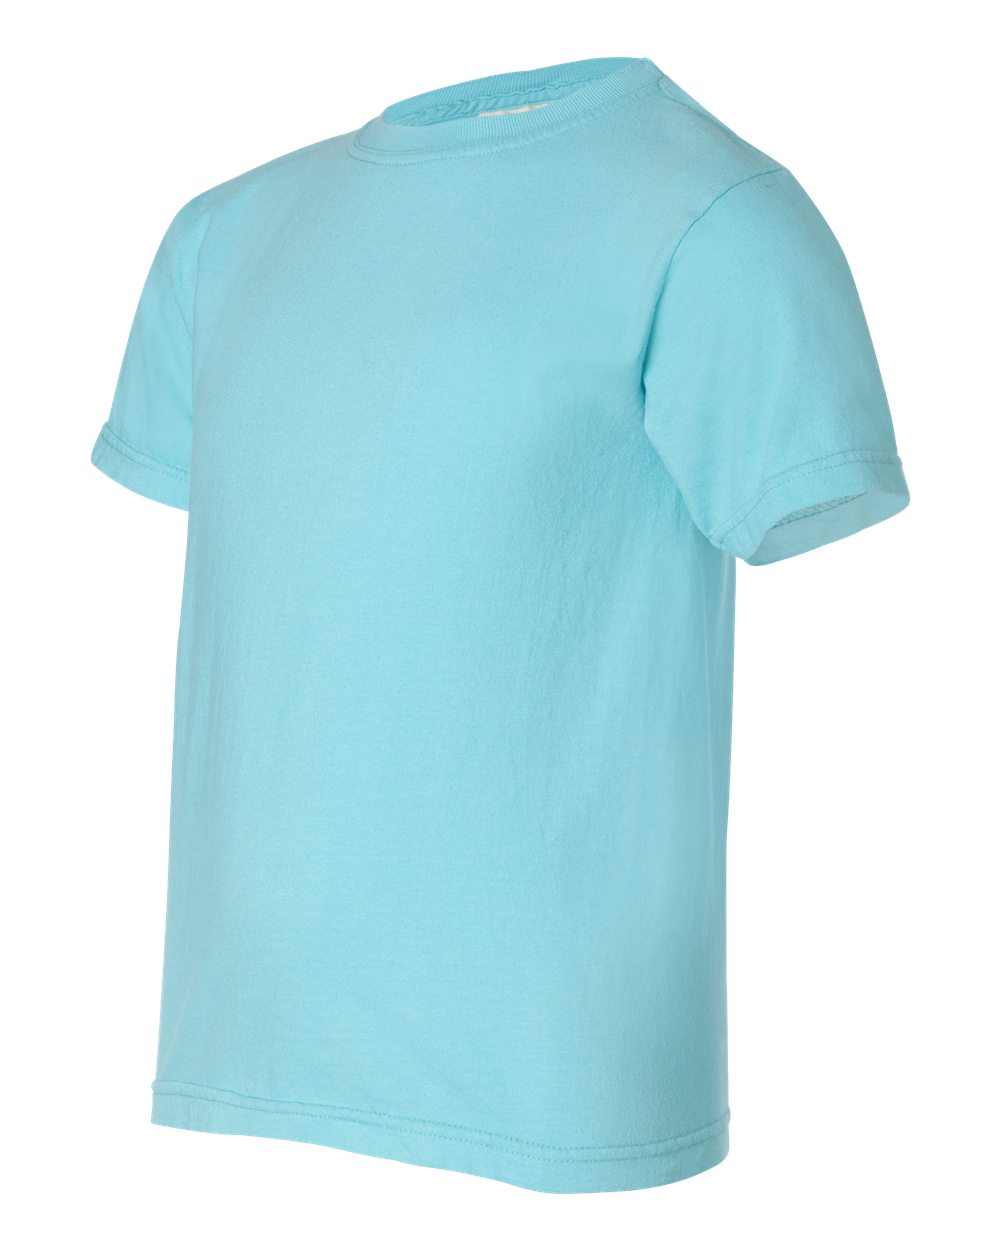 Comfort Colors 9018 - Youth Pigment-Dyed Ringspun T-Shirt